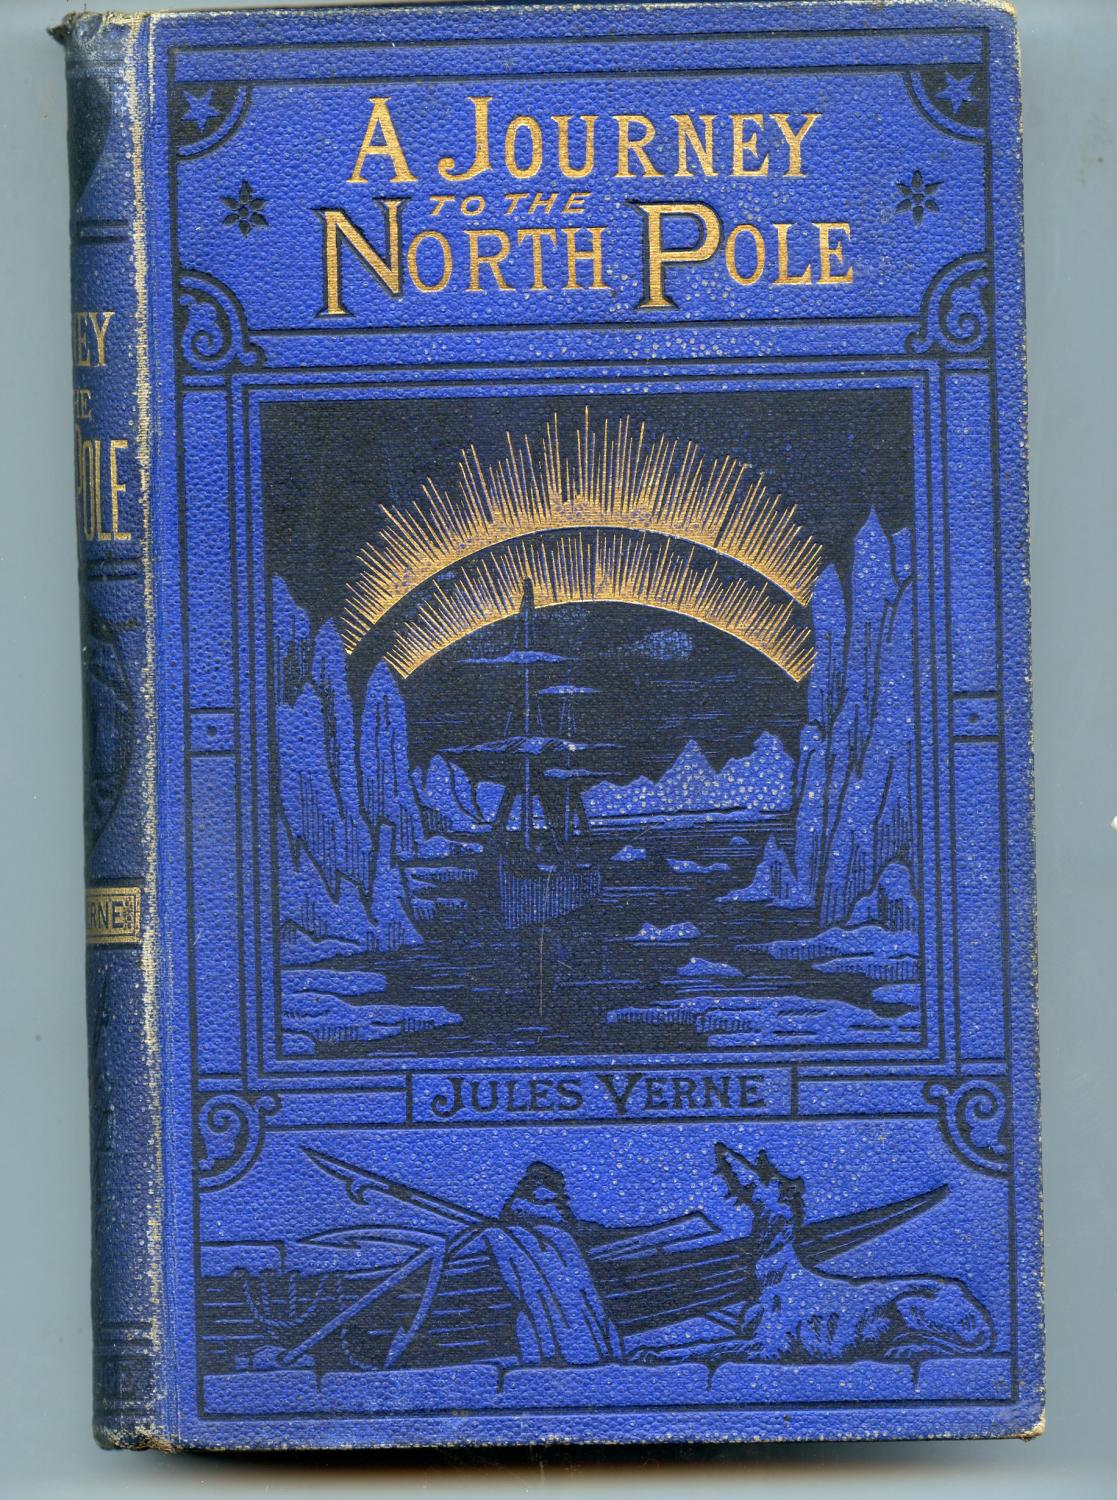 a journey to the north pole